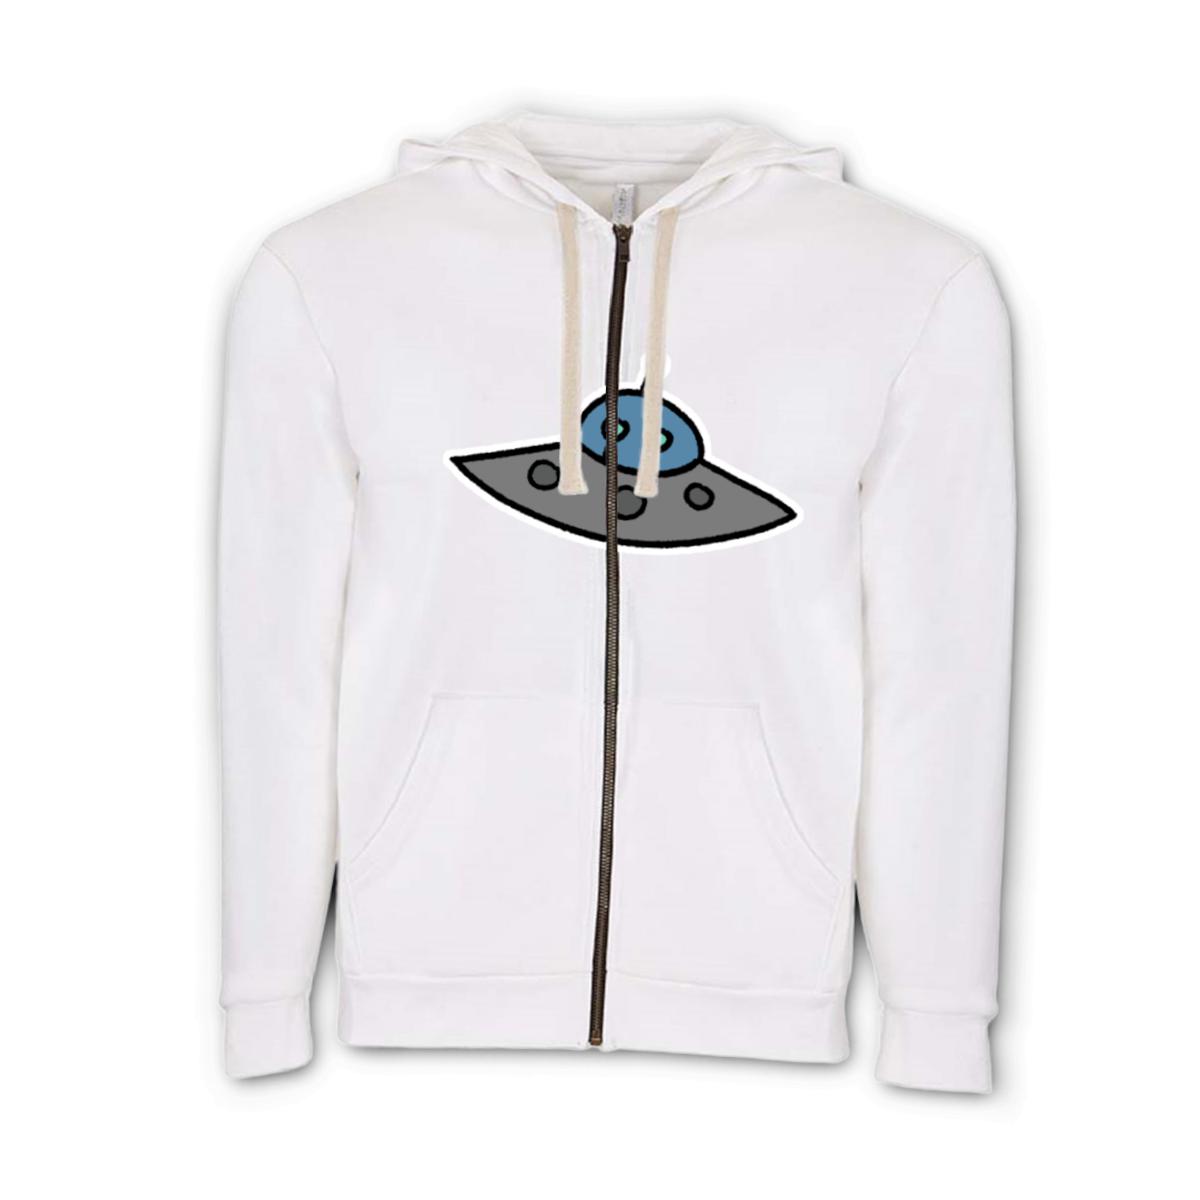 Flying Saucer Unisex Zip Hoodie Extra Large white